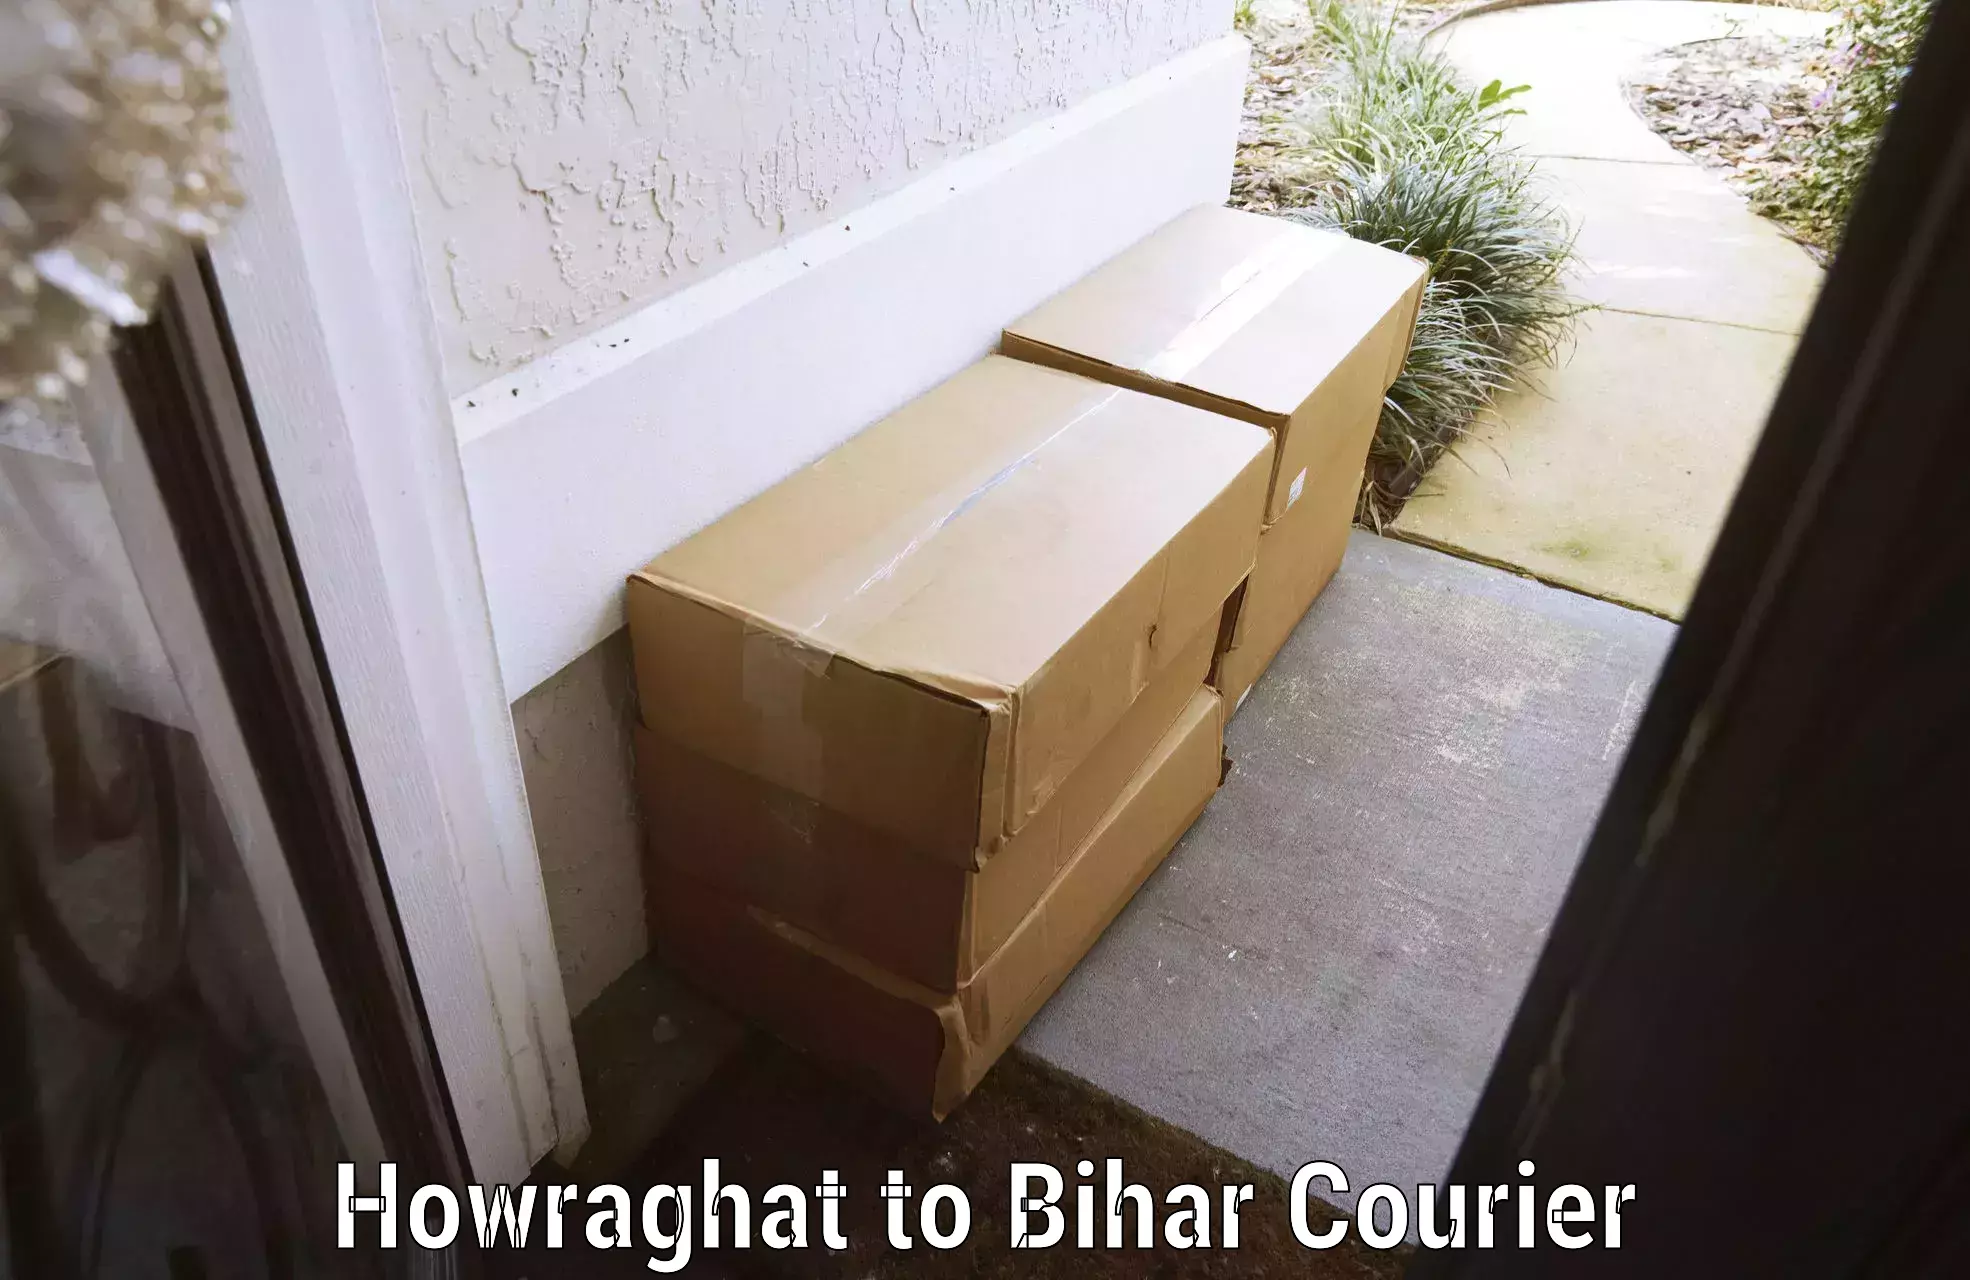 Premium luggage delivery Howraghat to Bihar Sharif